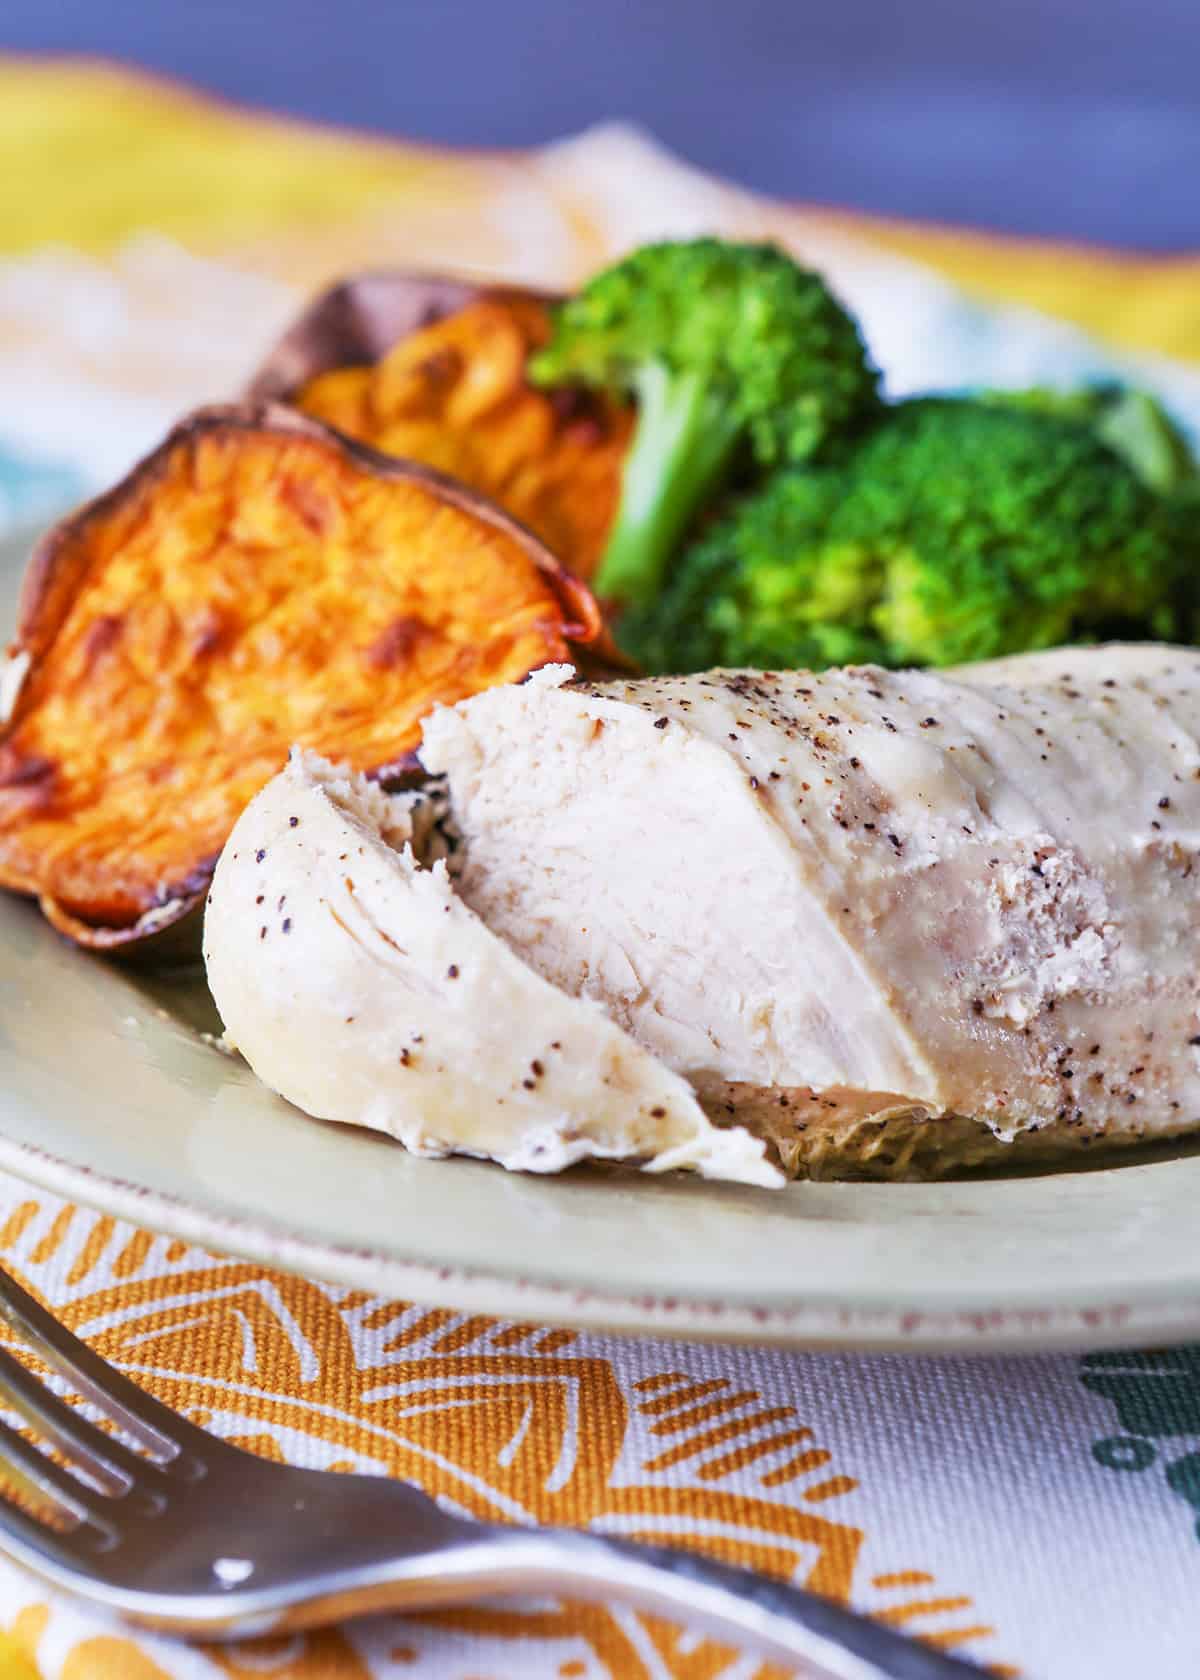 Chicken breast cut into, exposing perfectly cooked and tender meat.